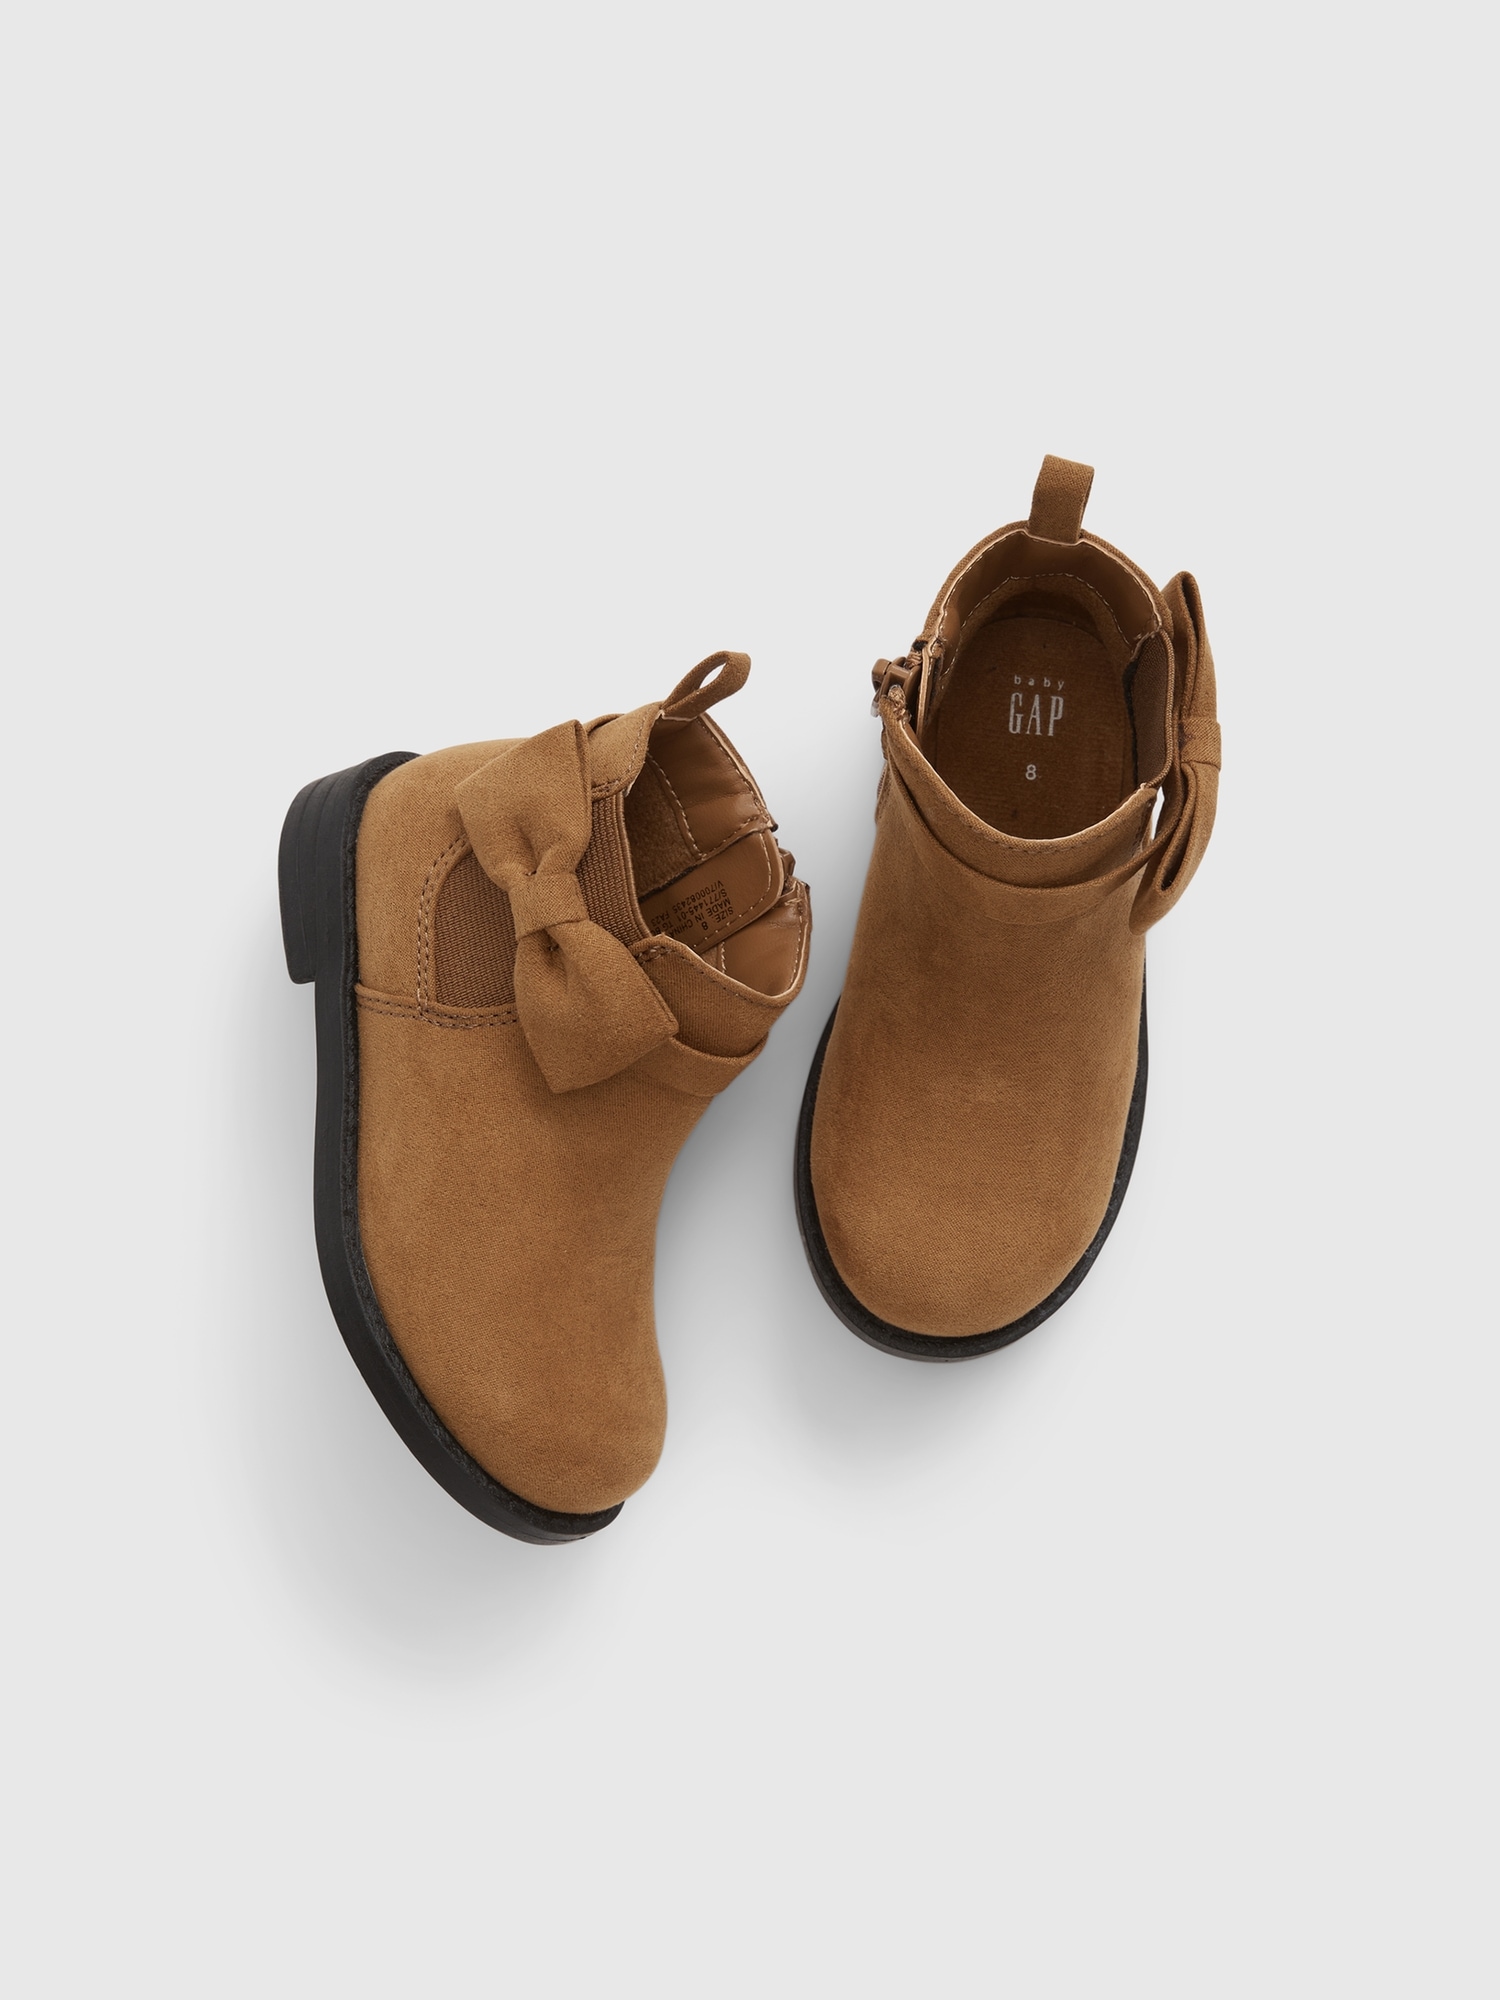 Gap Toddler Bow Ankle Boots